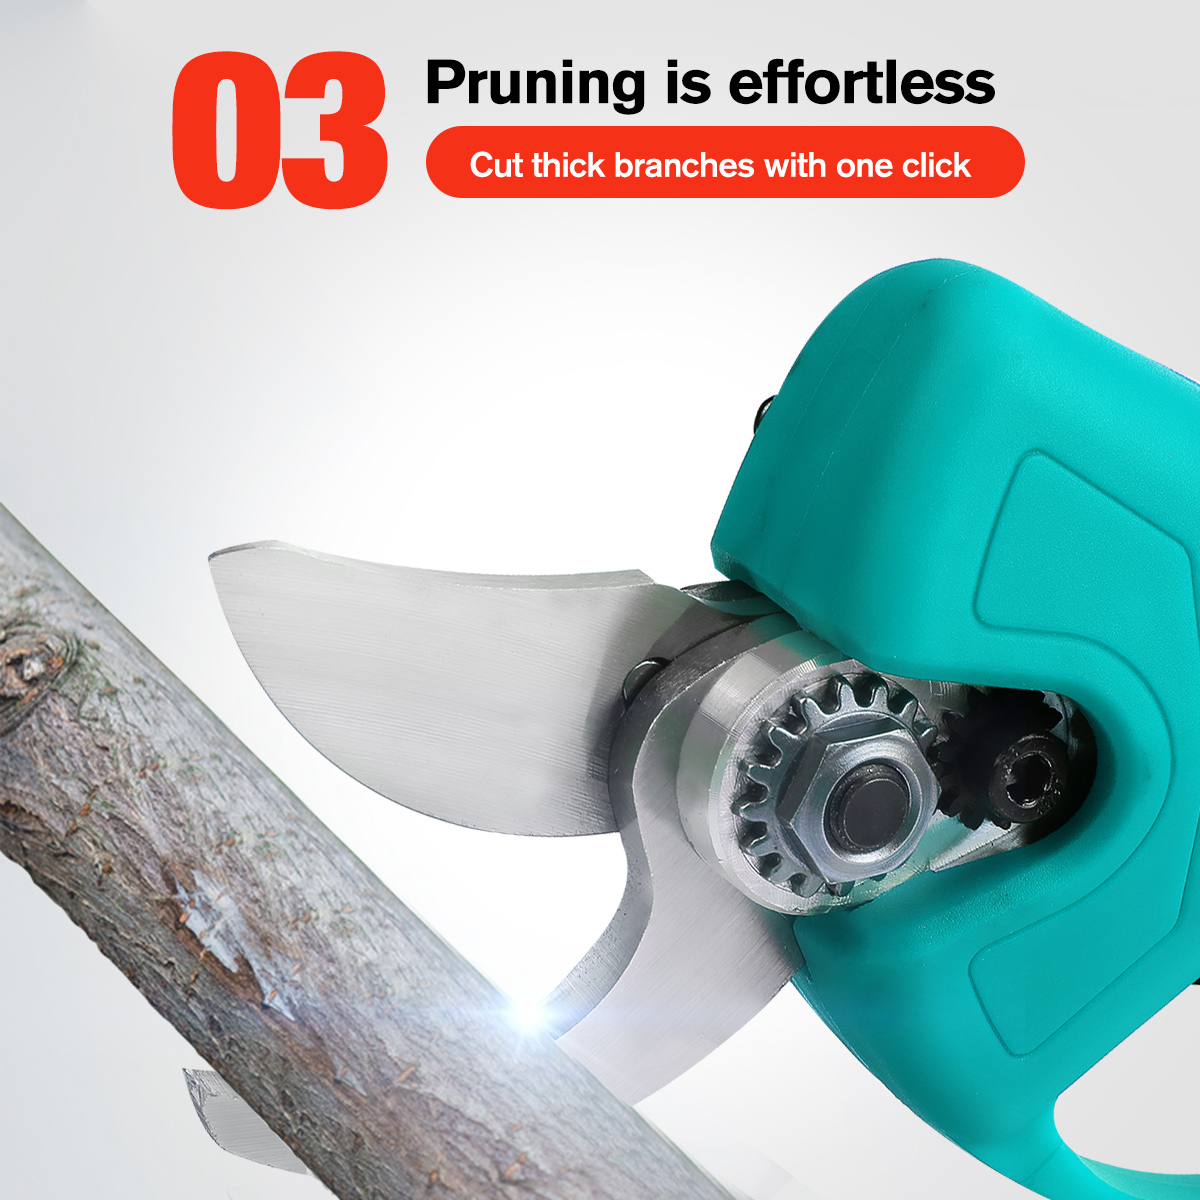 BLMIATKO-Wireless-Electric-Pruning-Shears-Scissors-Branches-Cutter-W-1-or-2pcs-Battery-Gardening-Too-1879784-6